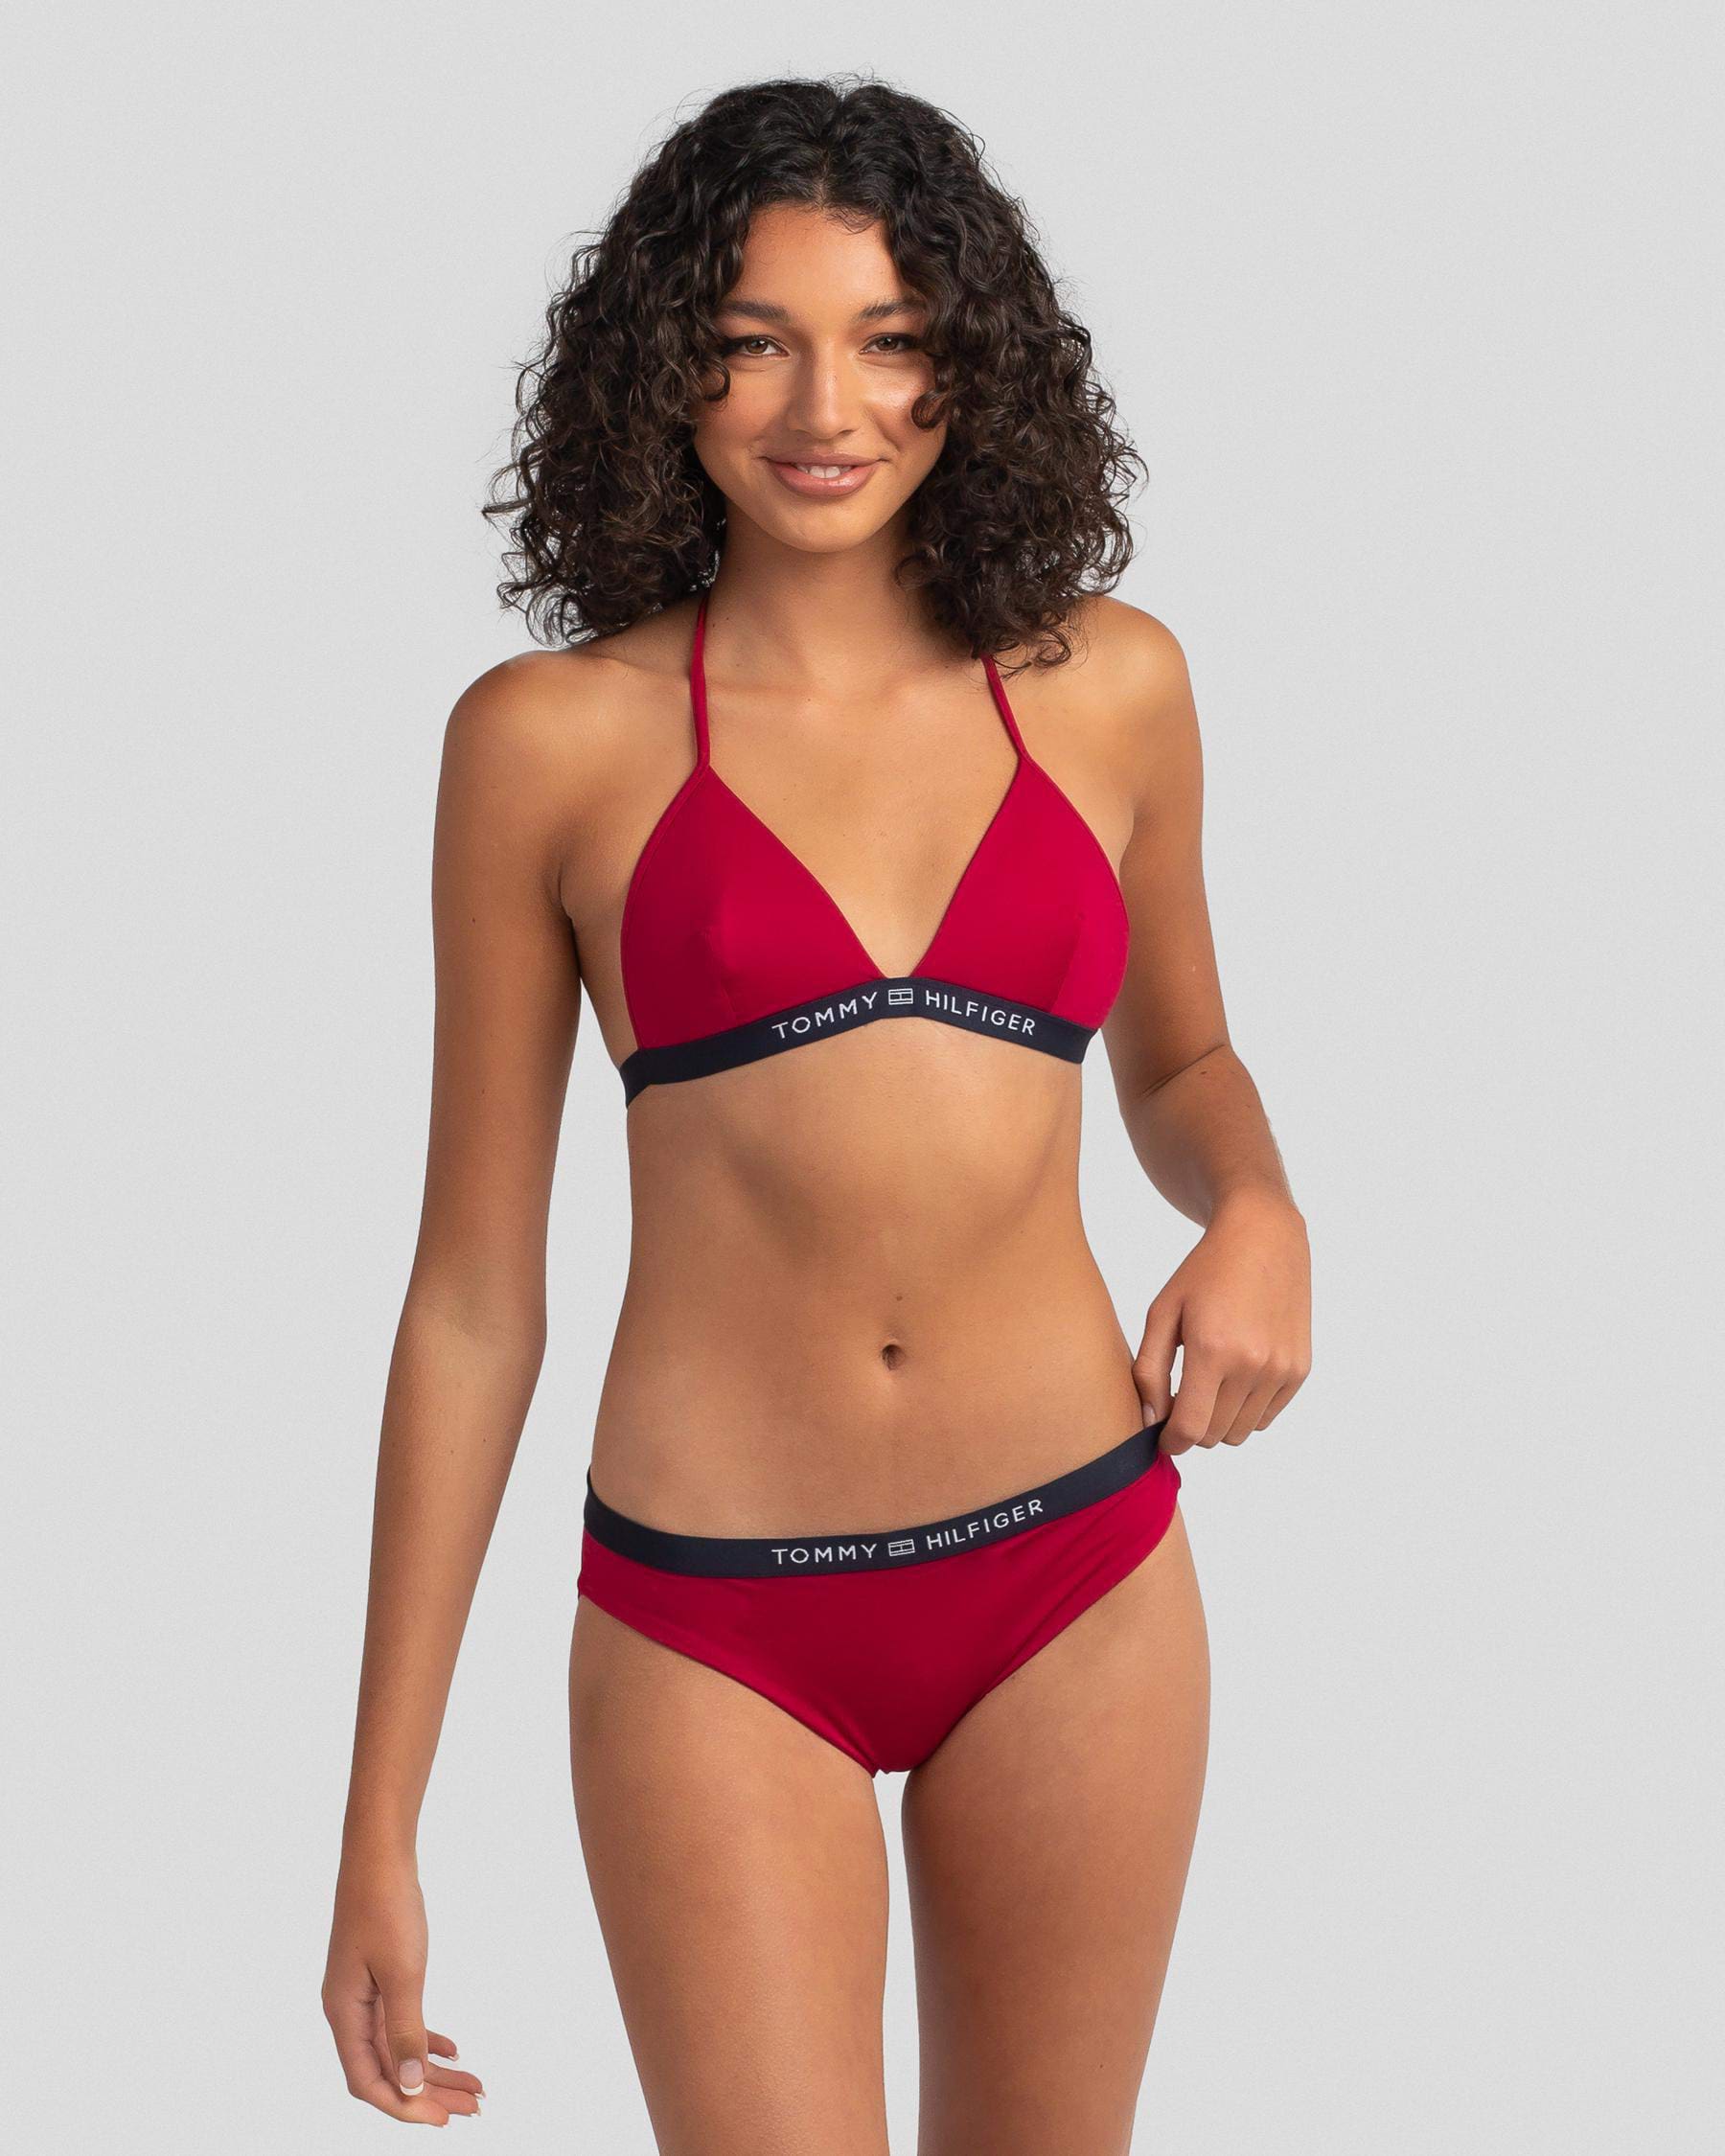 Tommy Hilfiger Core Solid Triangle Bikini Top In Magenta Fast Shipping & Easy Returns - Beach United States